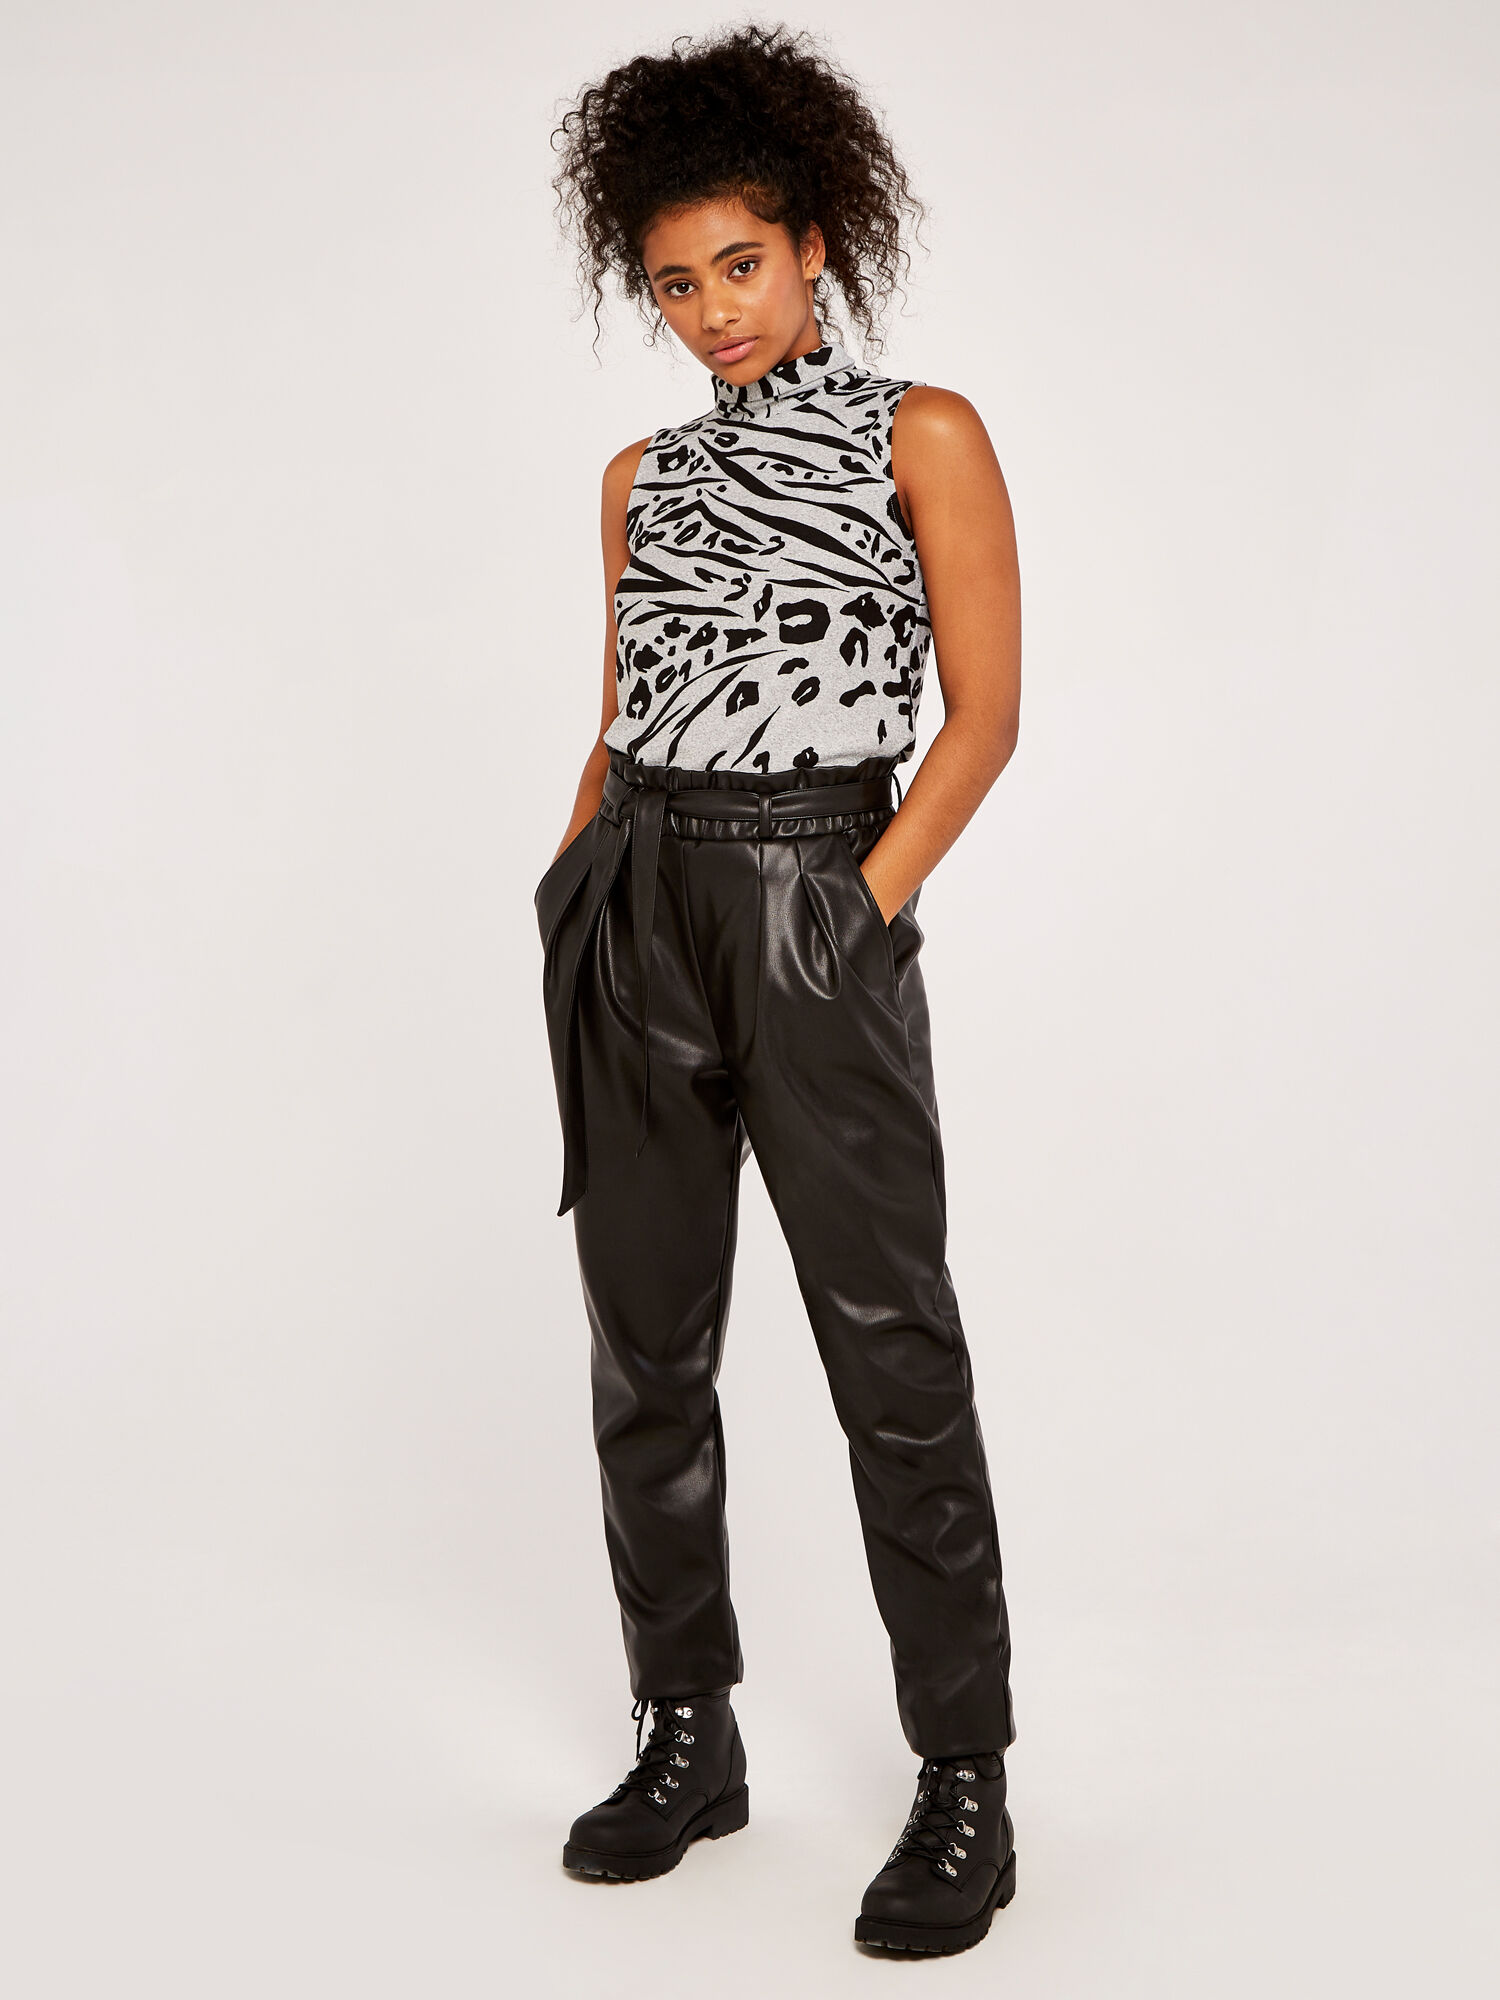 New Look Leather Trousers outlet  Women  1800 products on sale   FASHIOLAcouk